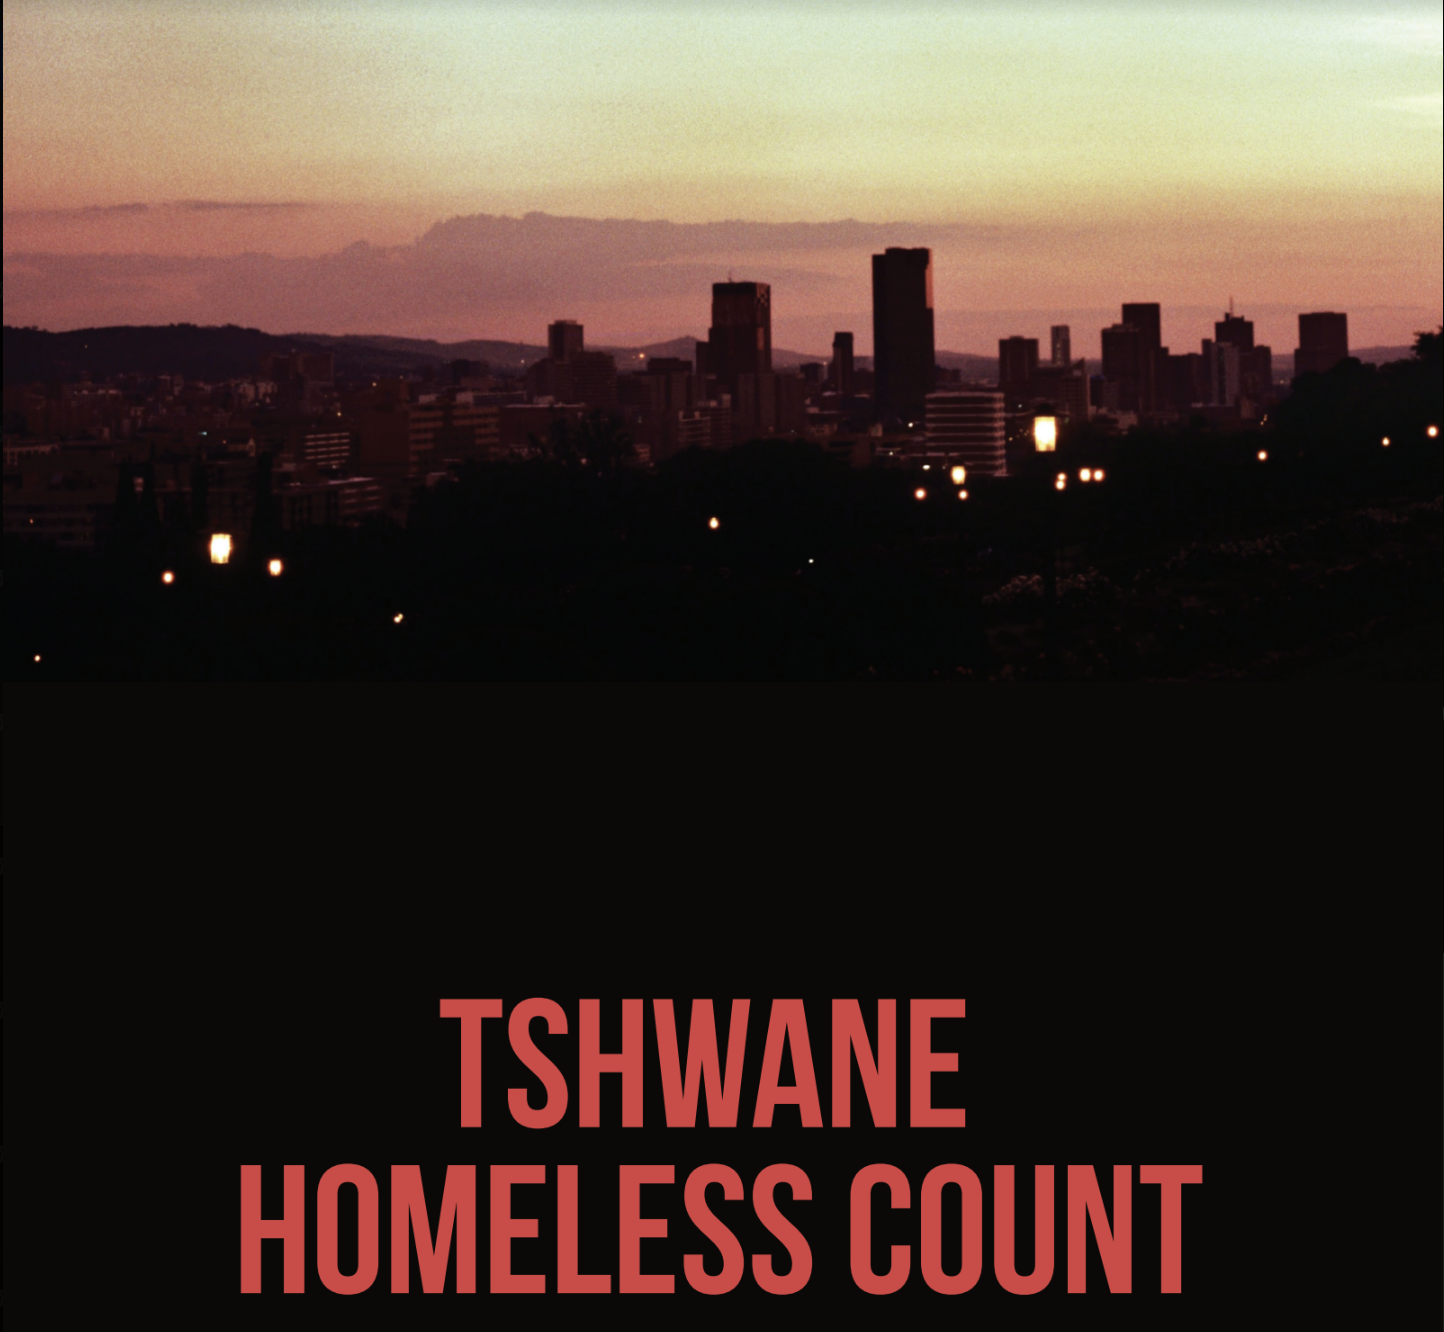 Everyone counted, counts! The first homeless count in the City of Tshwane, October 2022 Research report